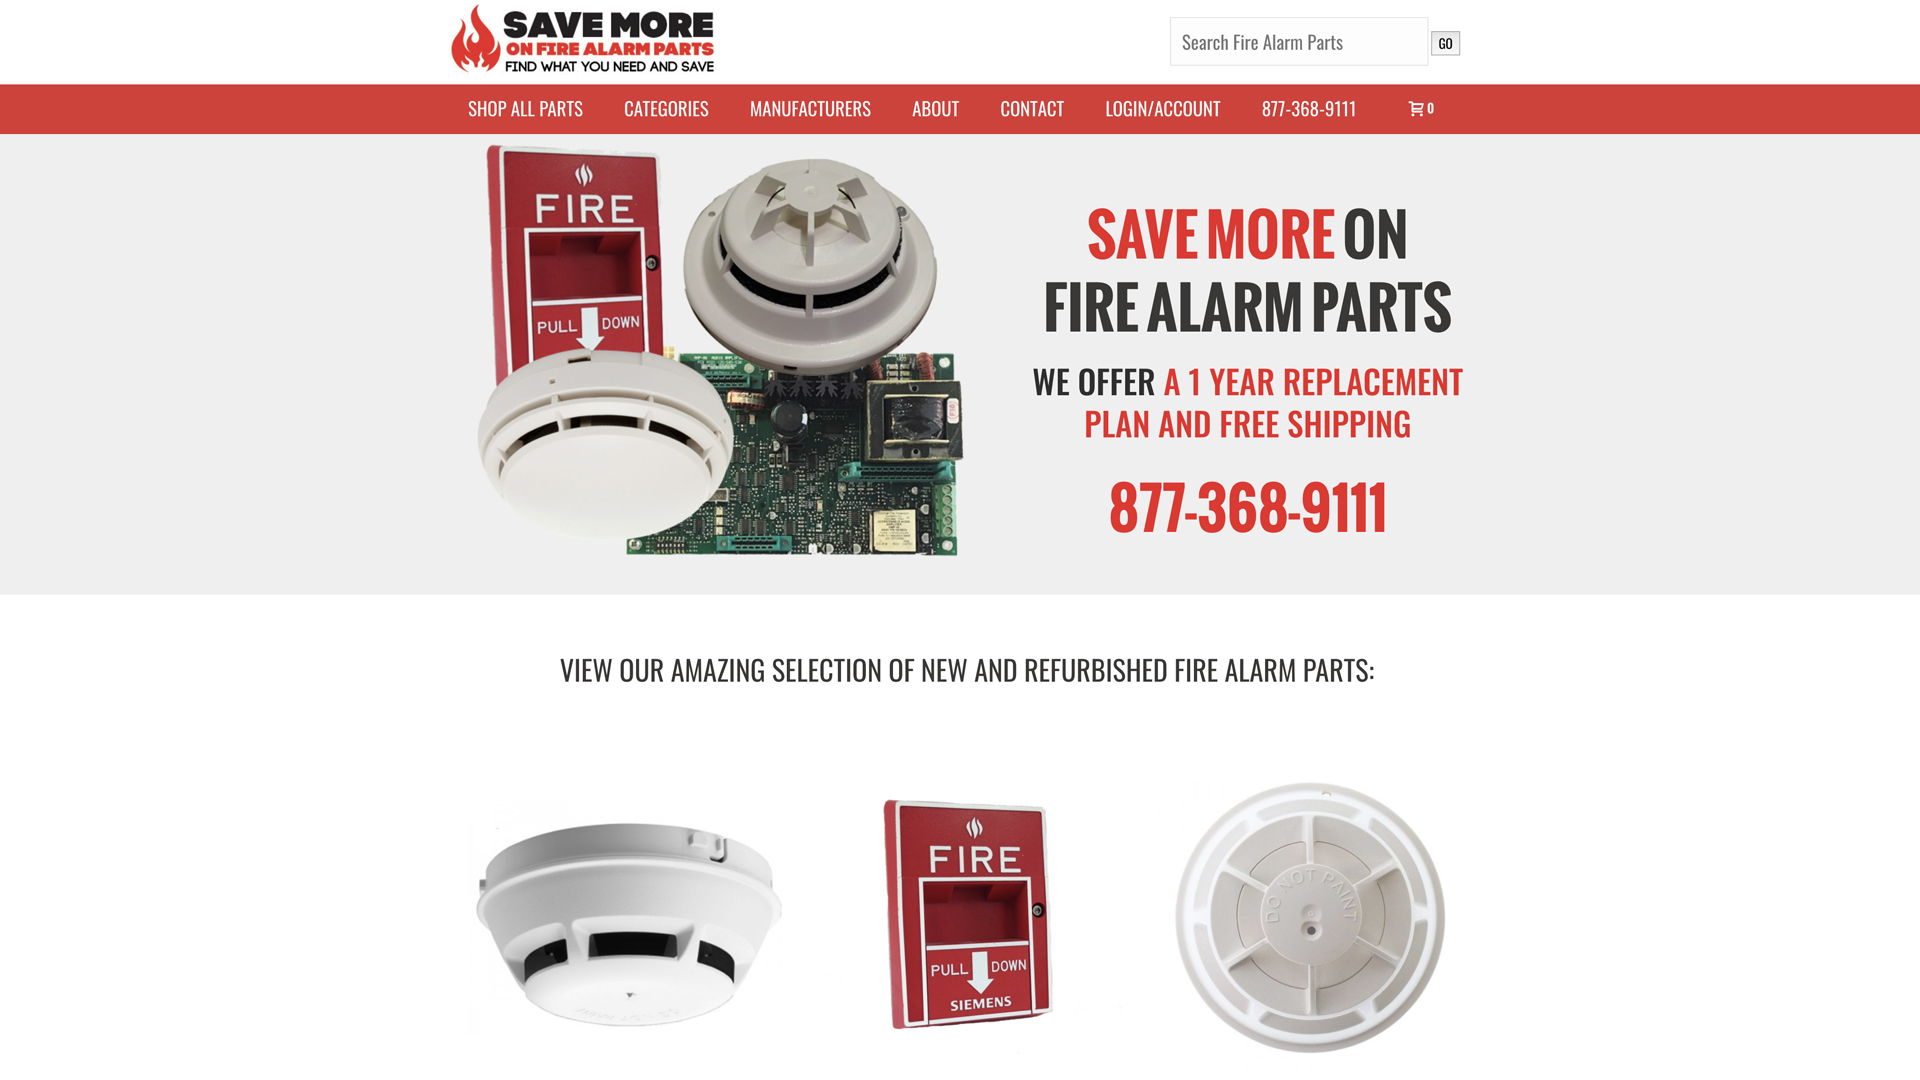 Save More on Fire Alarm Parts